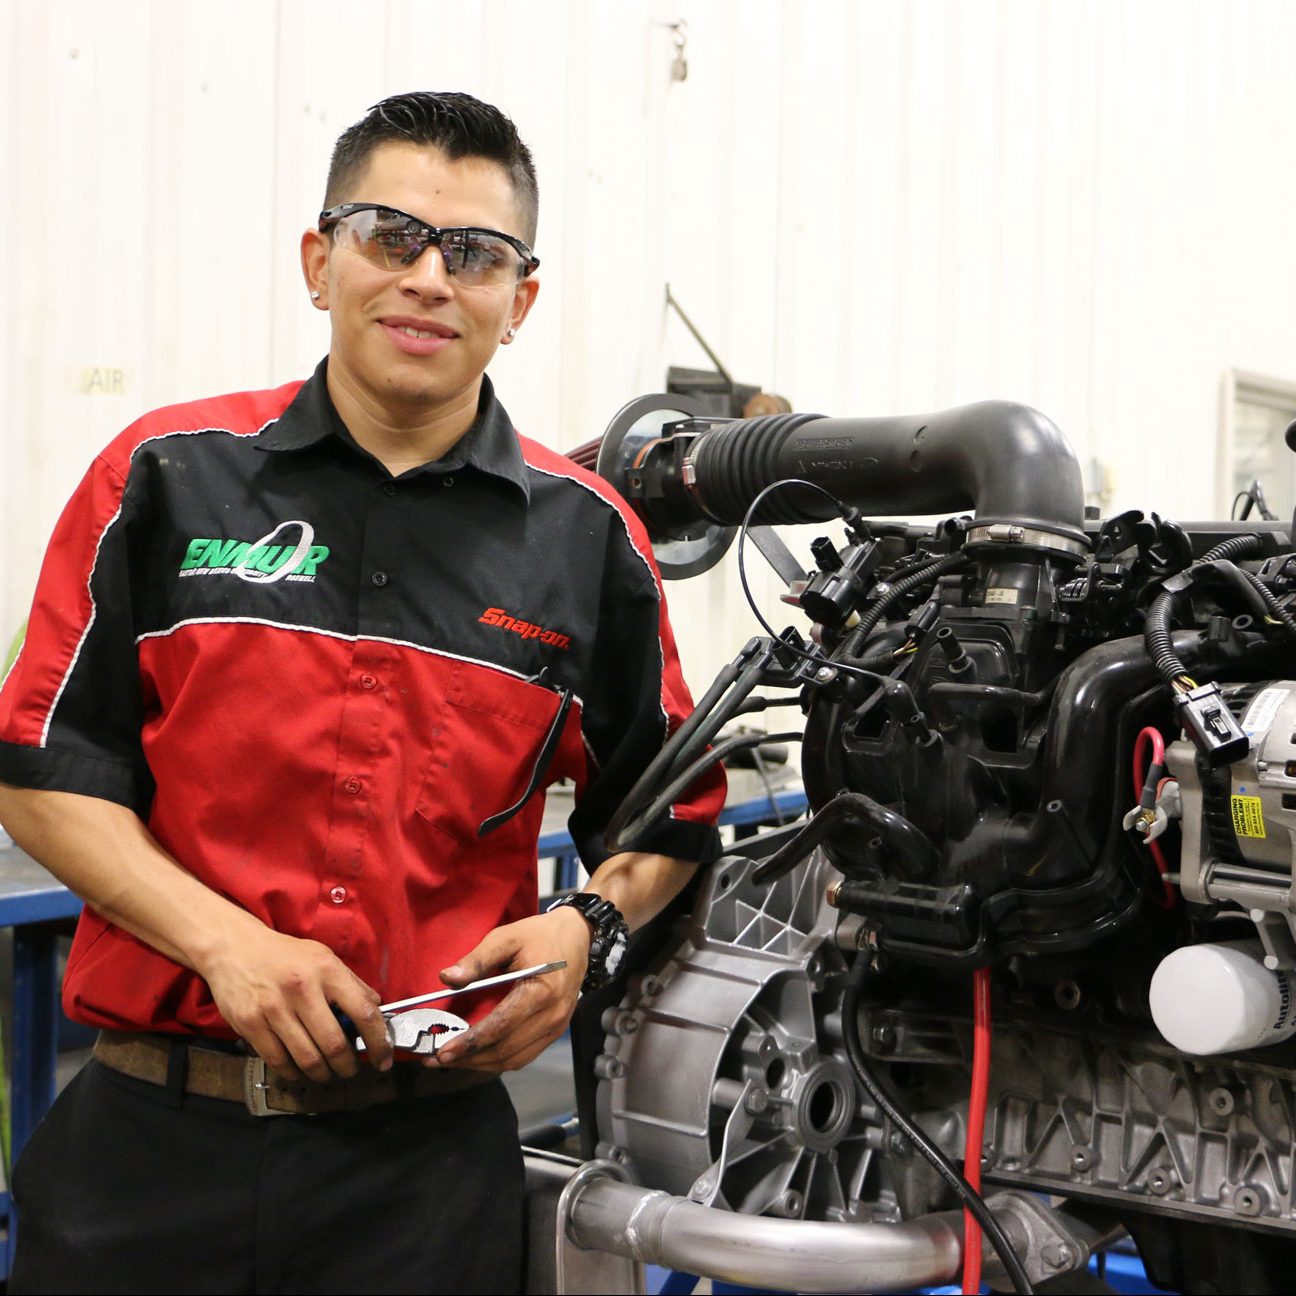 An automotive student of the Eastern New Mexico University Roswell campus poses with an engine